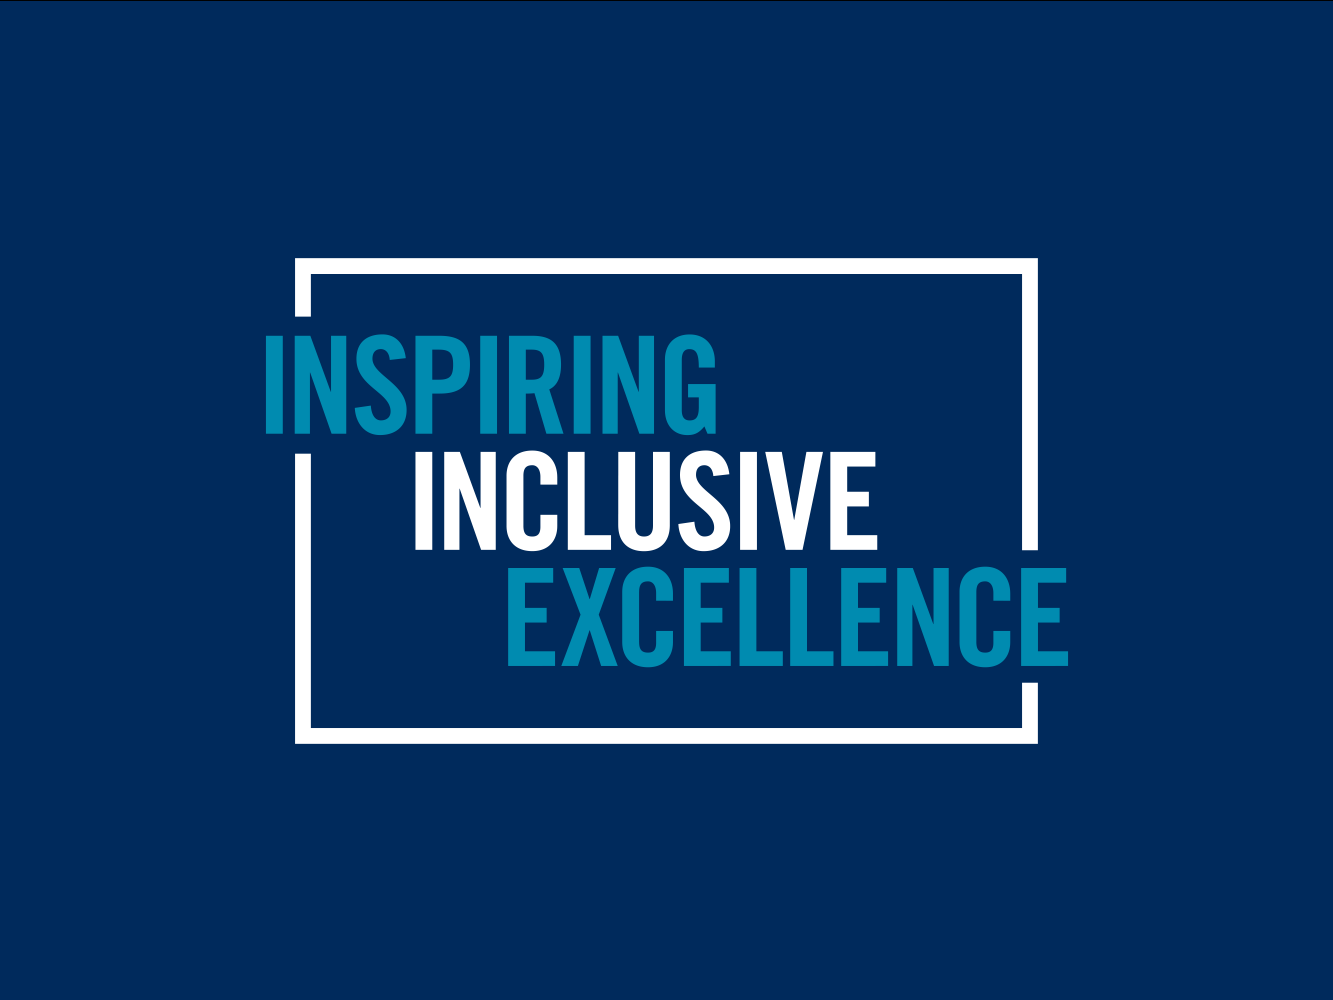 Inspiring inclusive excellence